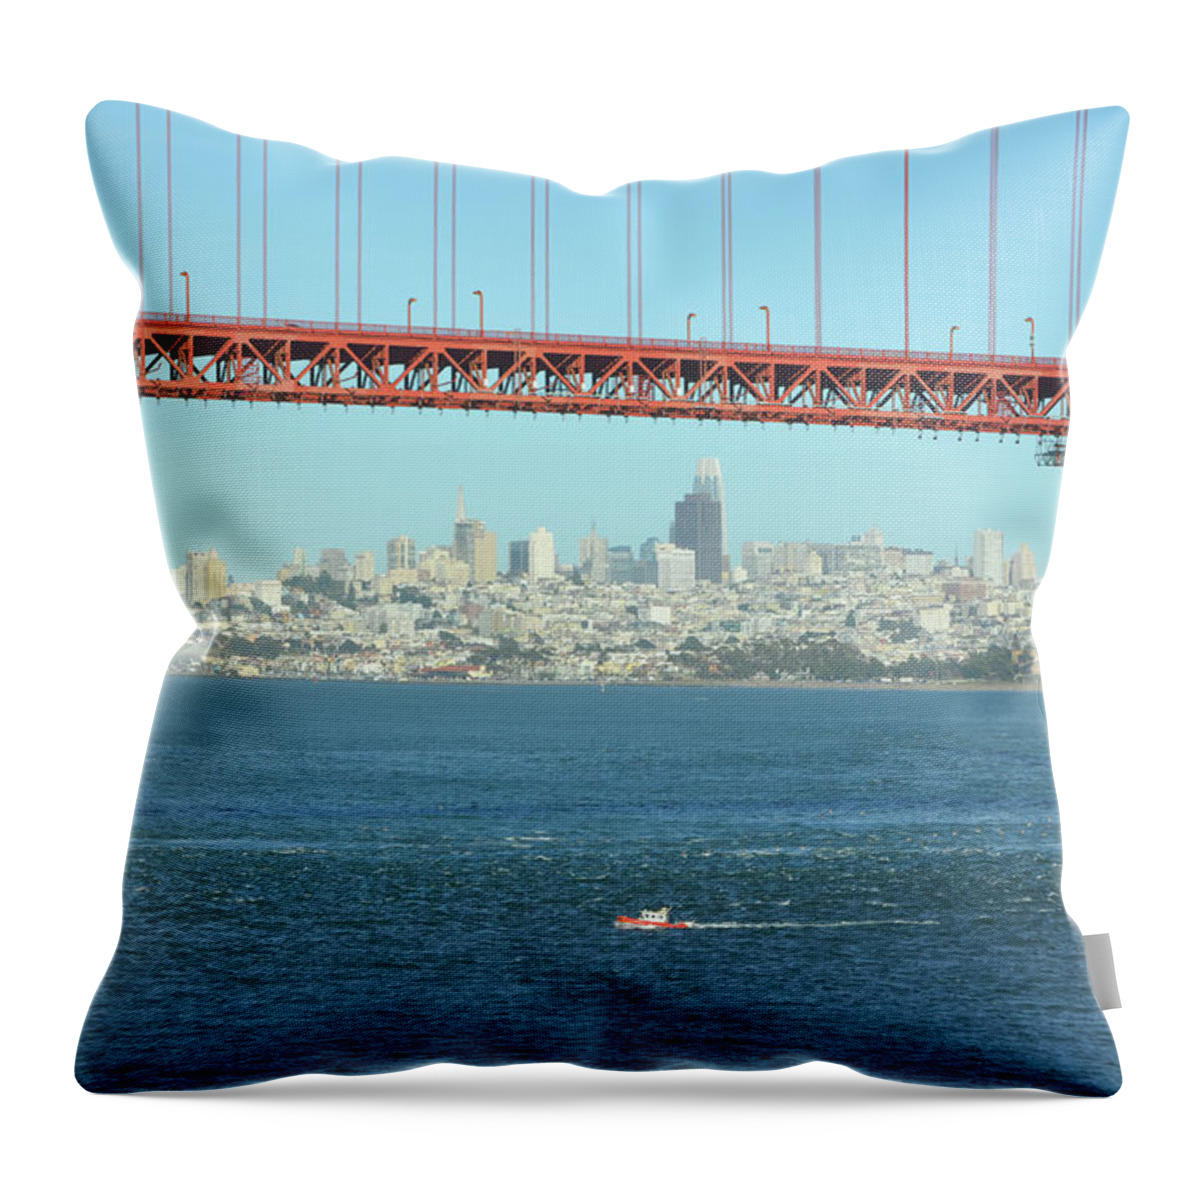 Golden Gate Bridge Throw Pillow featuring the photograph Small Boat and San Francisco Skyline under the Golden Gate Bridge by Shawn O'Brien